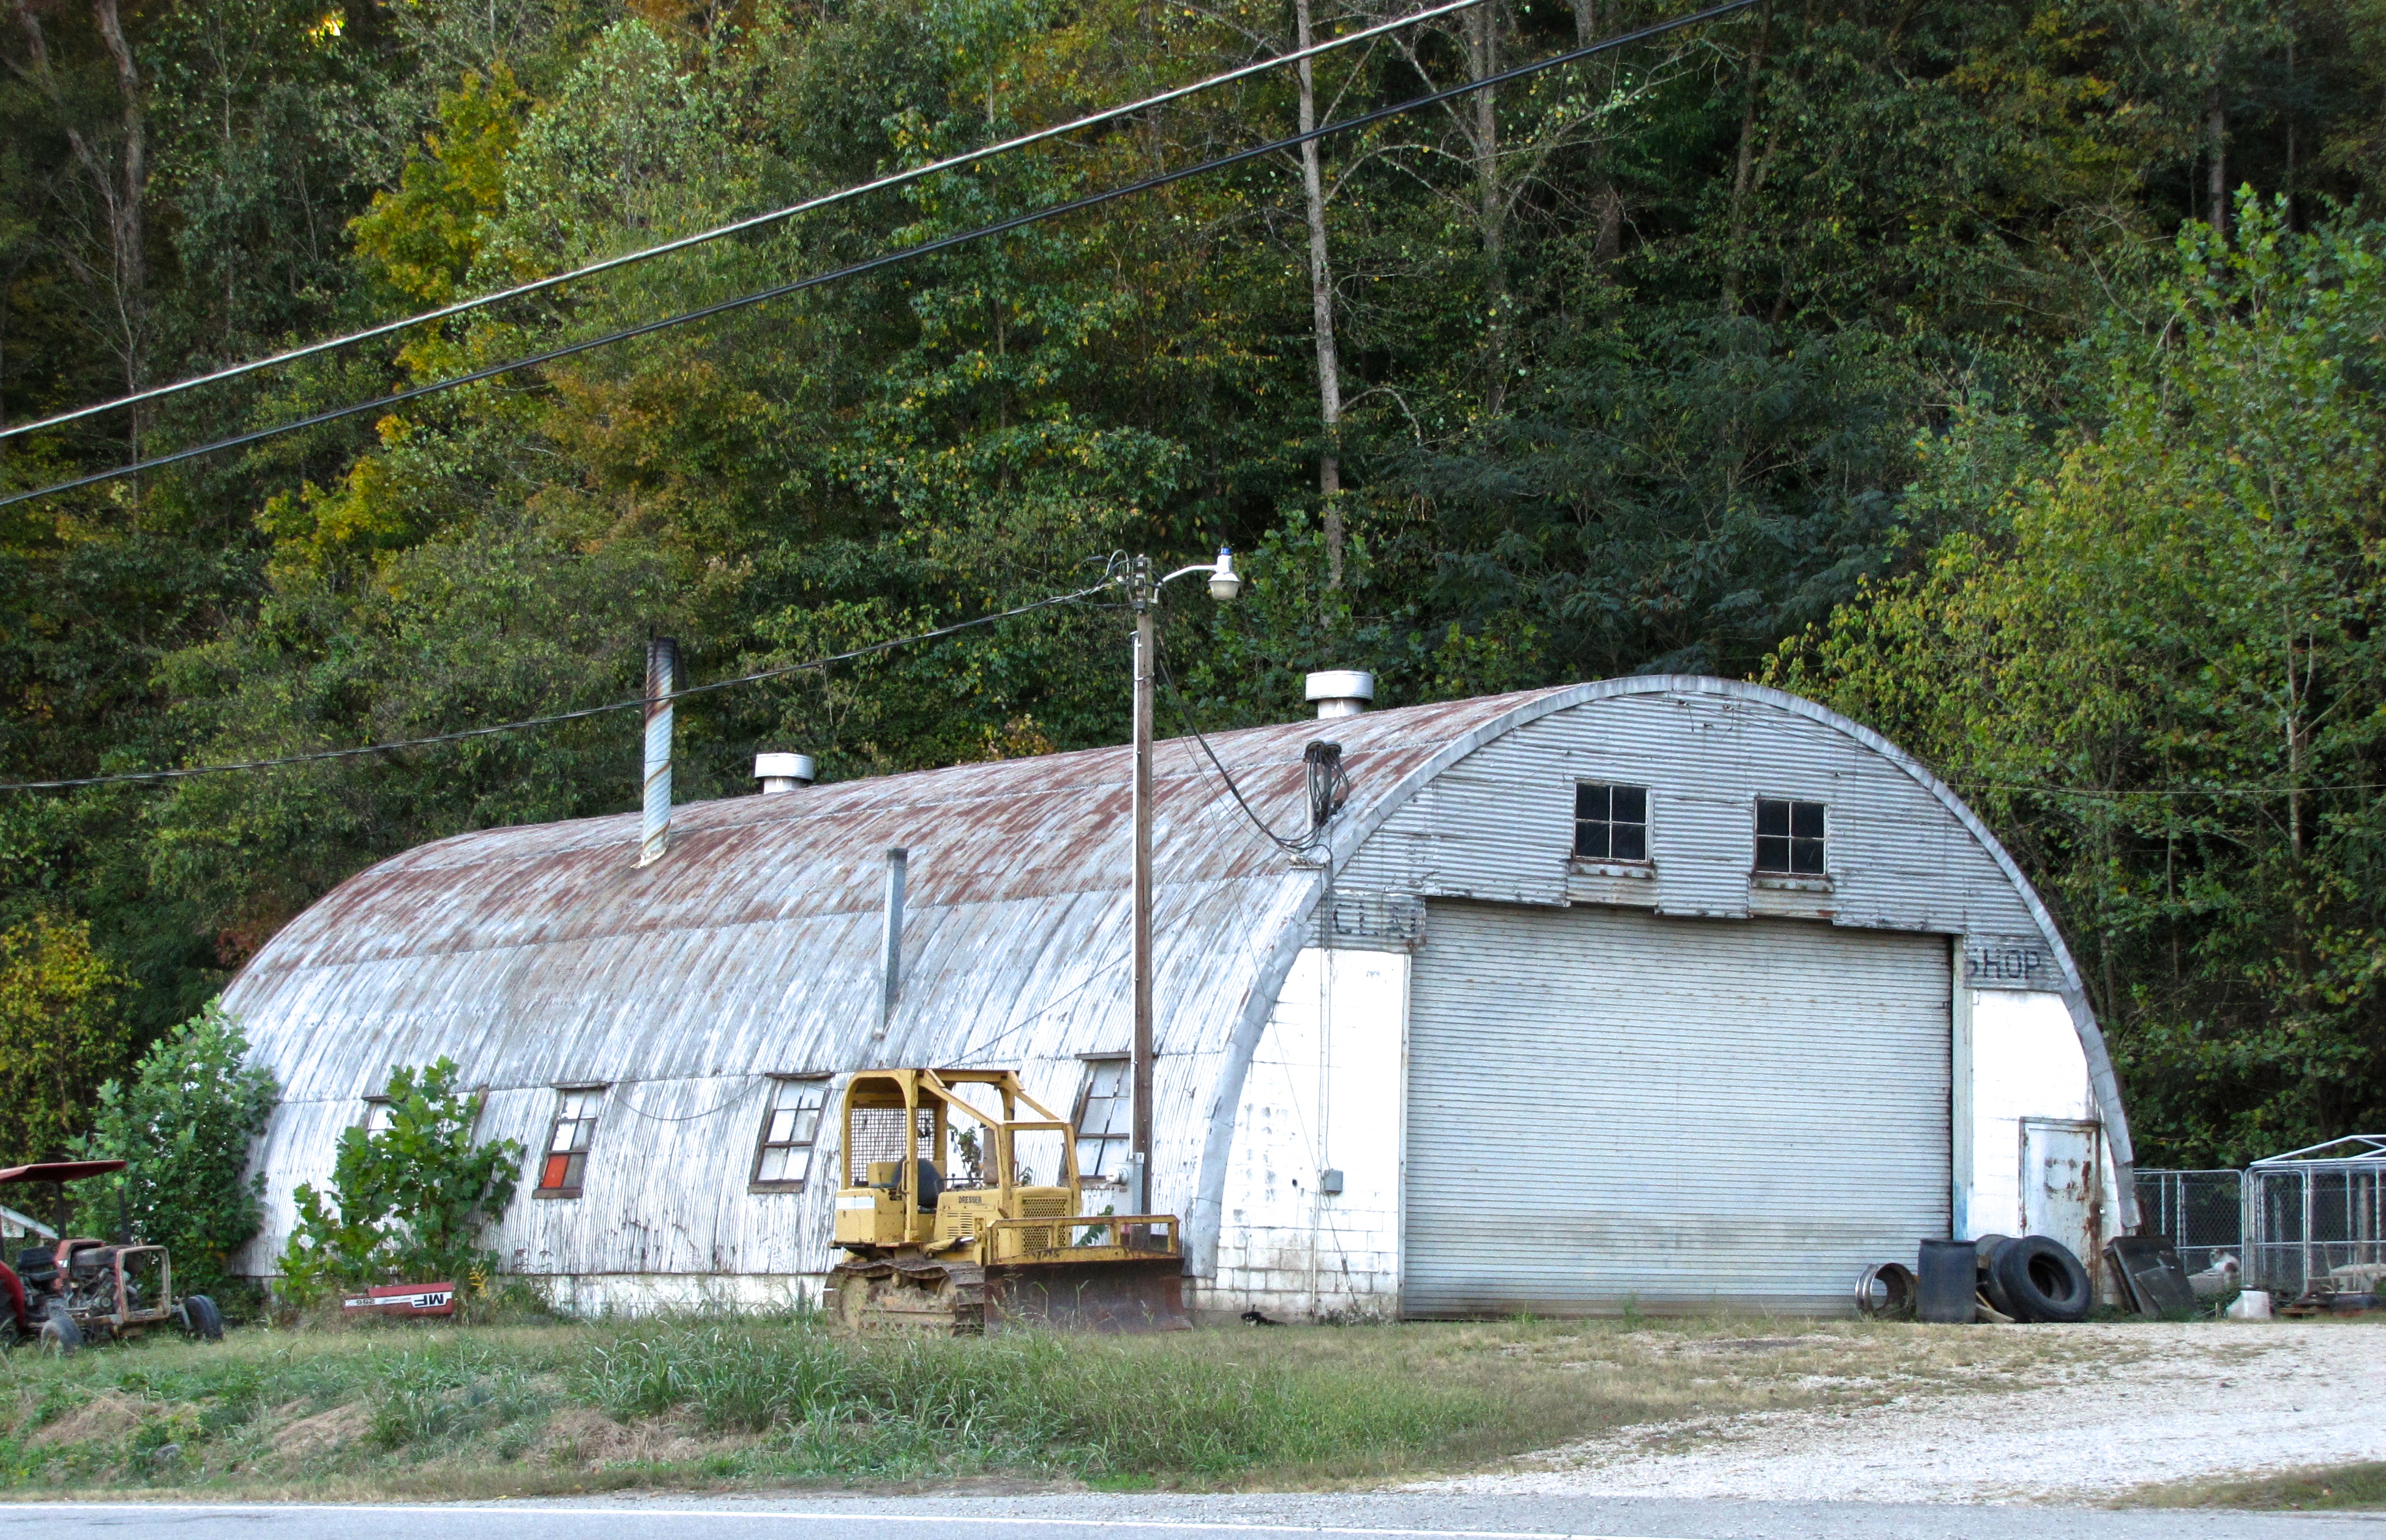 quonset hut in Bettendorf, IA